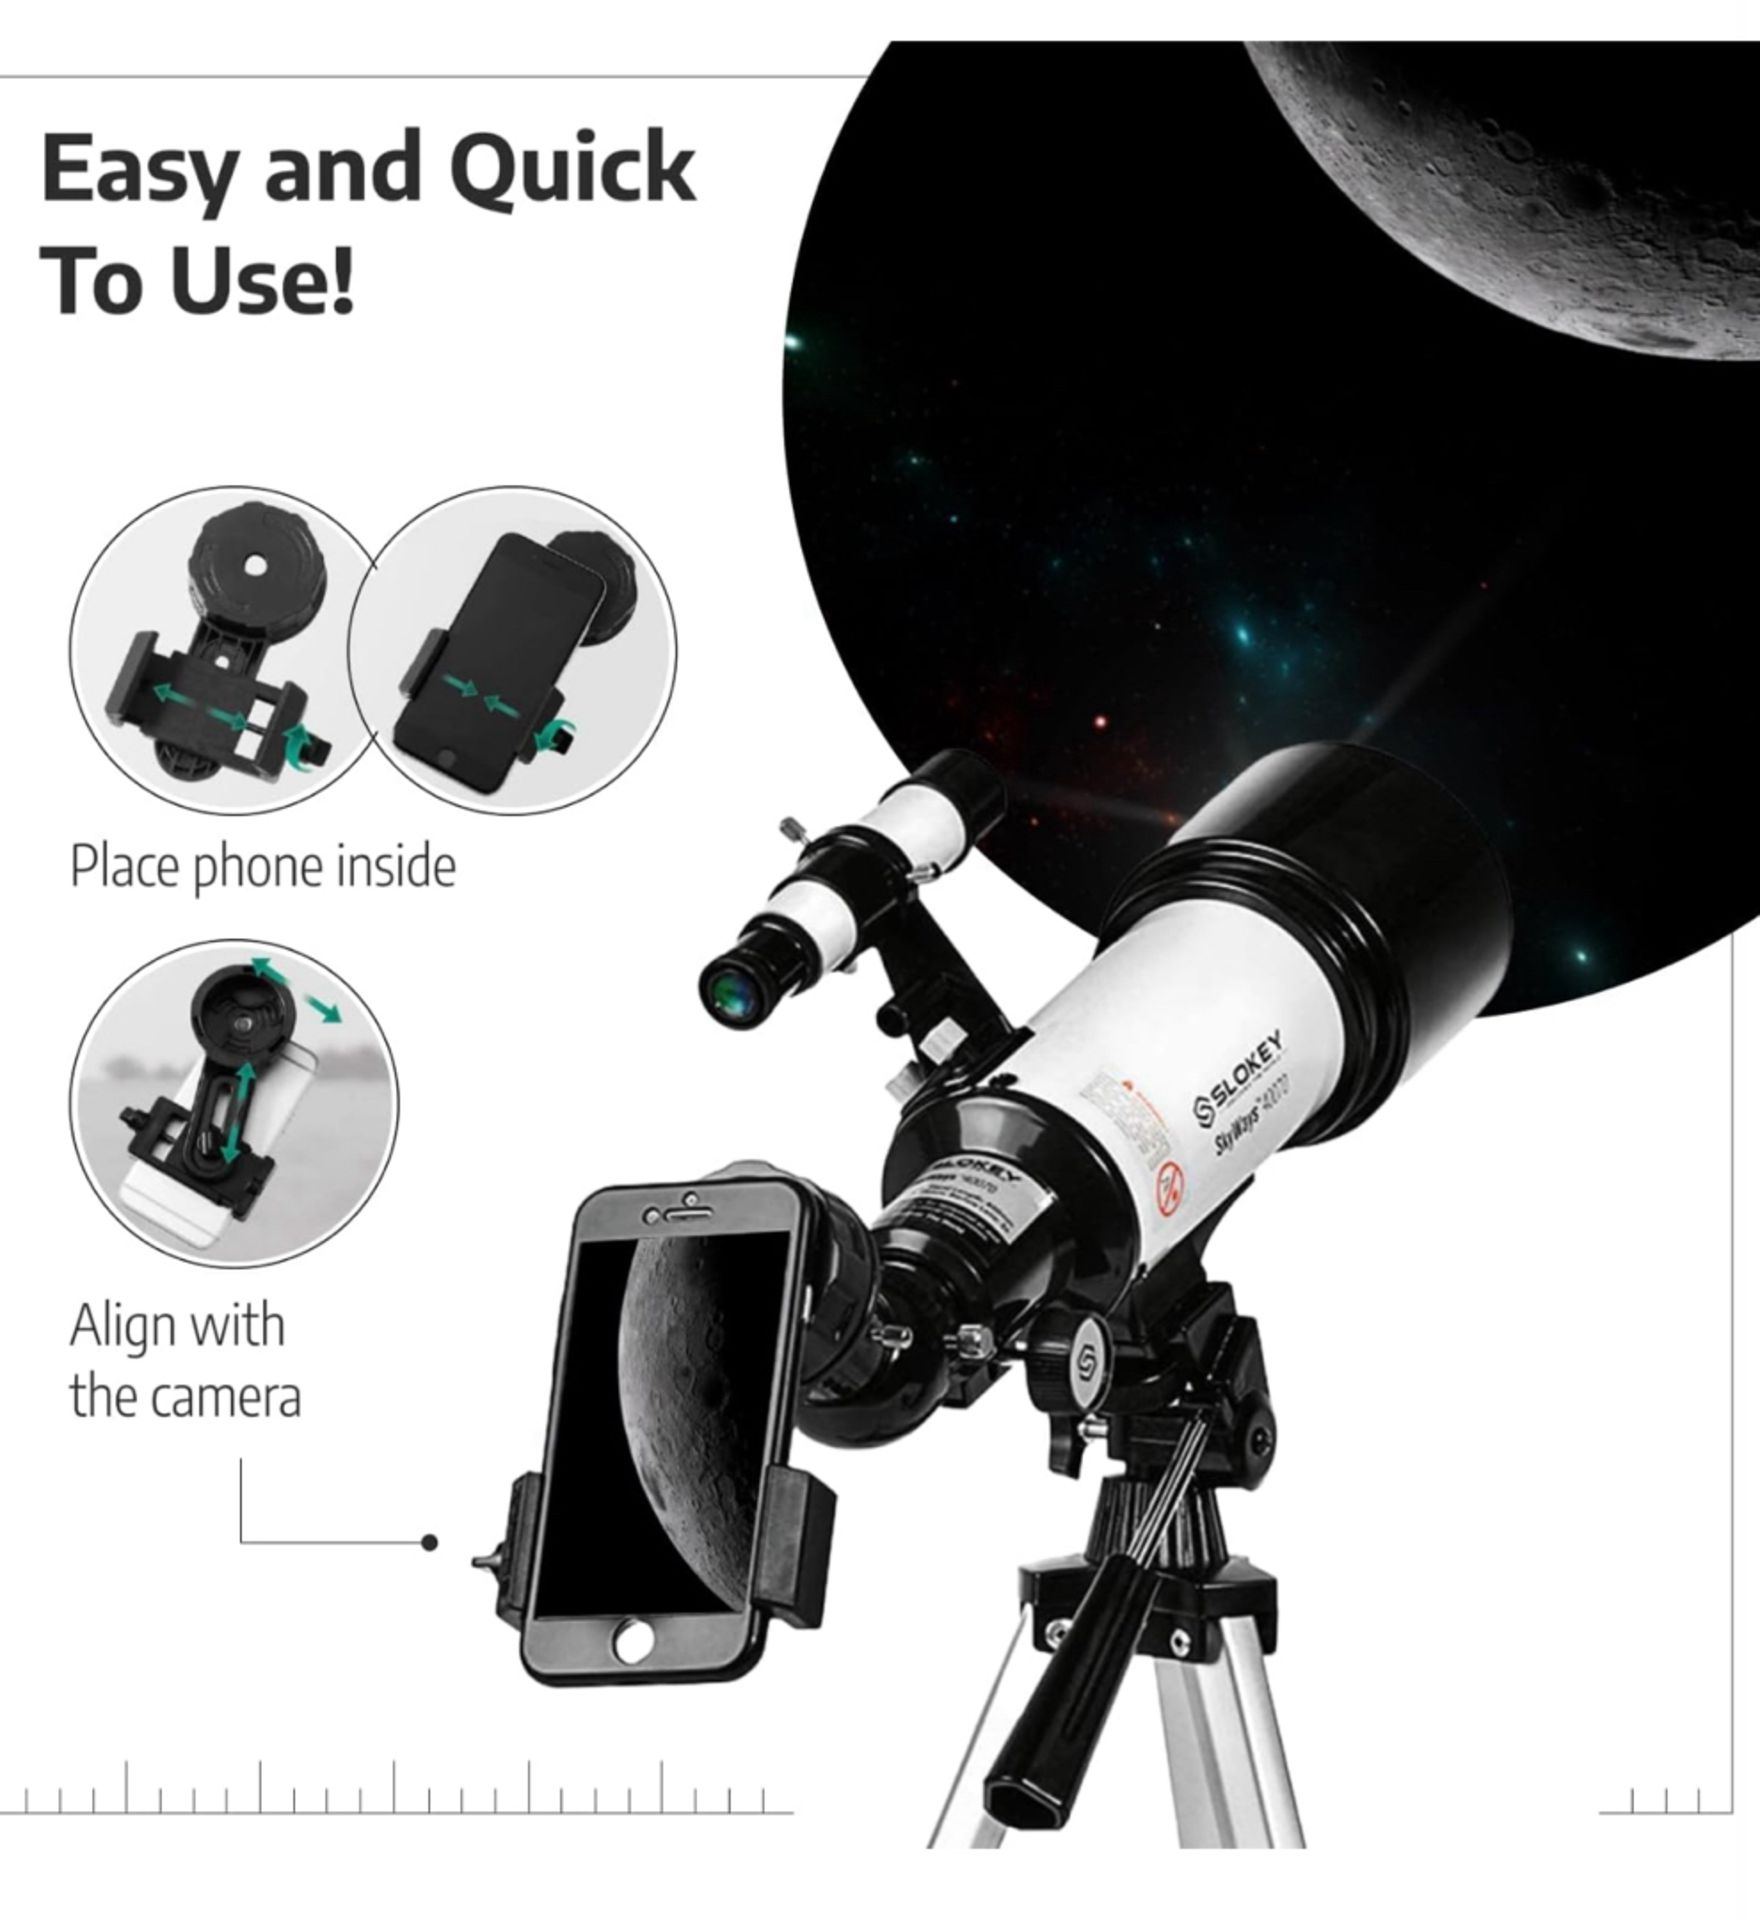 Slokey 40070 SKYWAYS TELESCOPE FOR ASTRONOMY WITH ACCESSORIES (NEW) - AMAZON PRICE Â£129.99! - Image 8 of 9